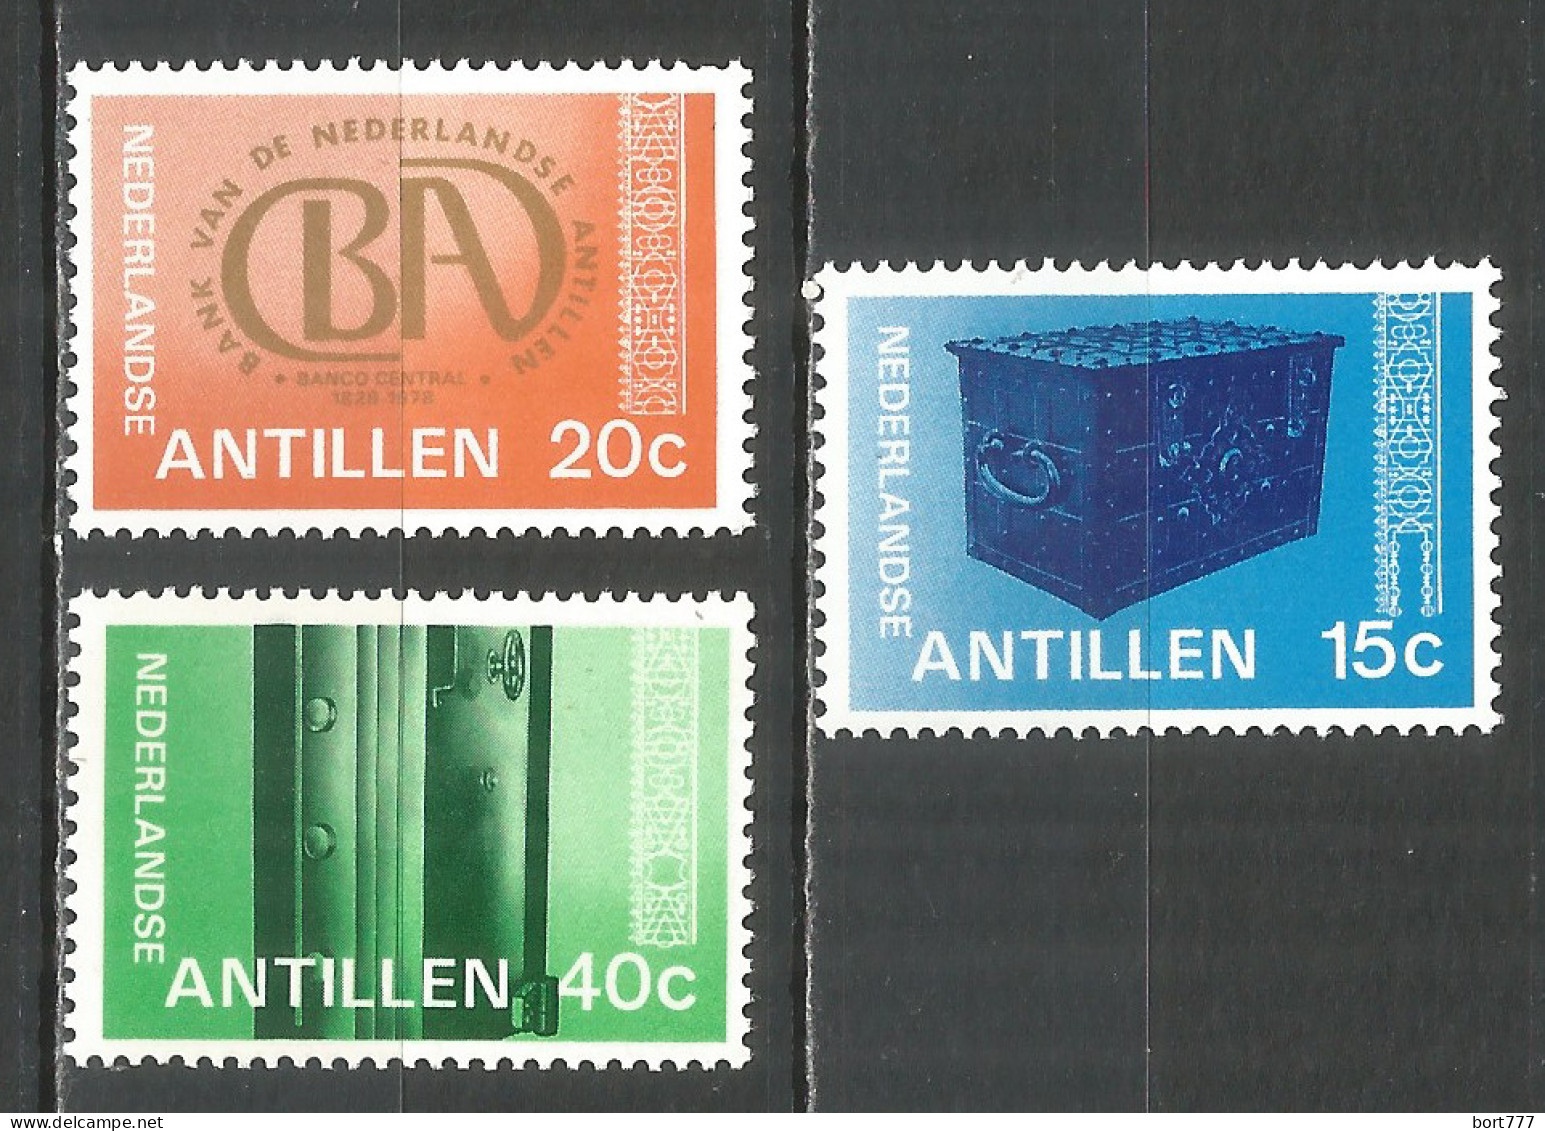 Netherlands Antilles 1978 Year , Mint Stamps MNH (**)  Michel# 352-354 - Curacao, Netherlands Antilles, Aruba